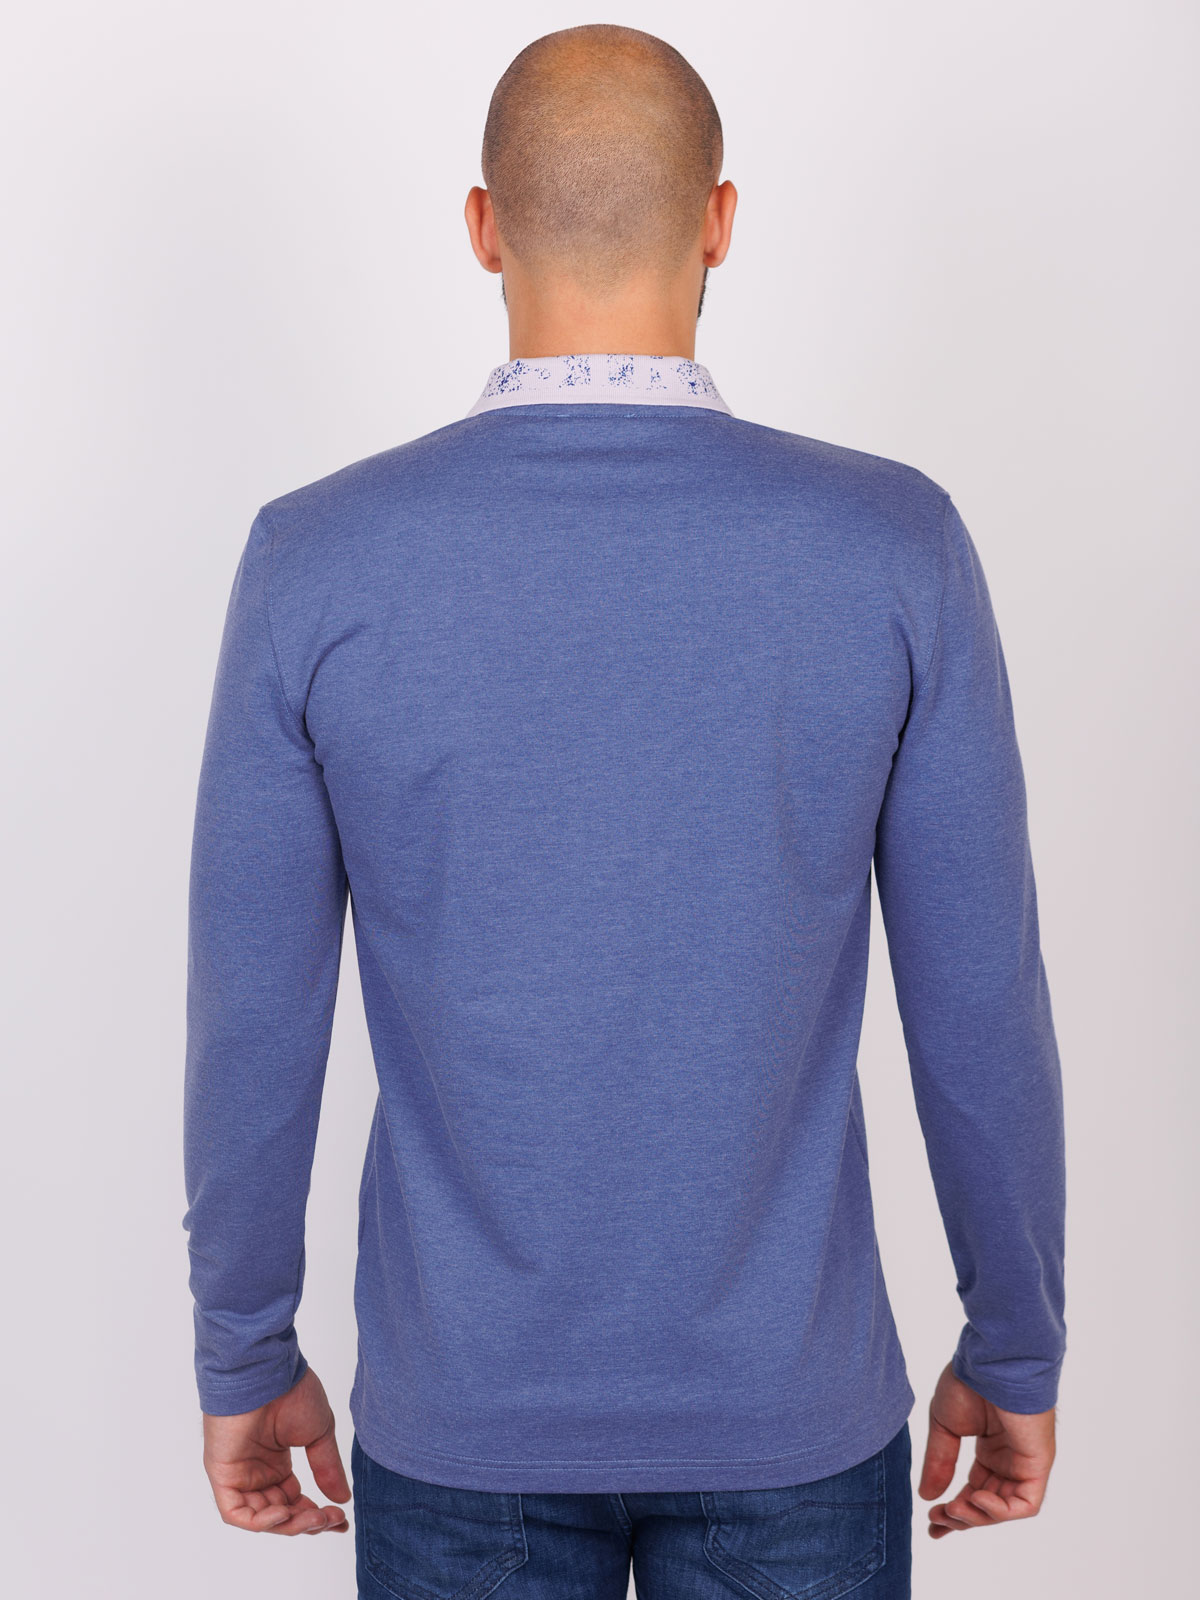 Blouse in blue with a spectacular collar - 18260 € 33.18 img2